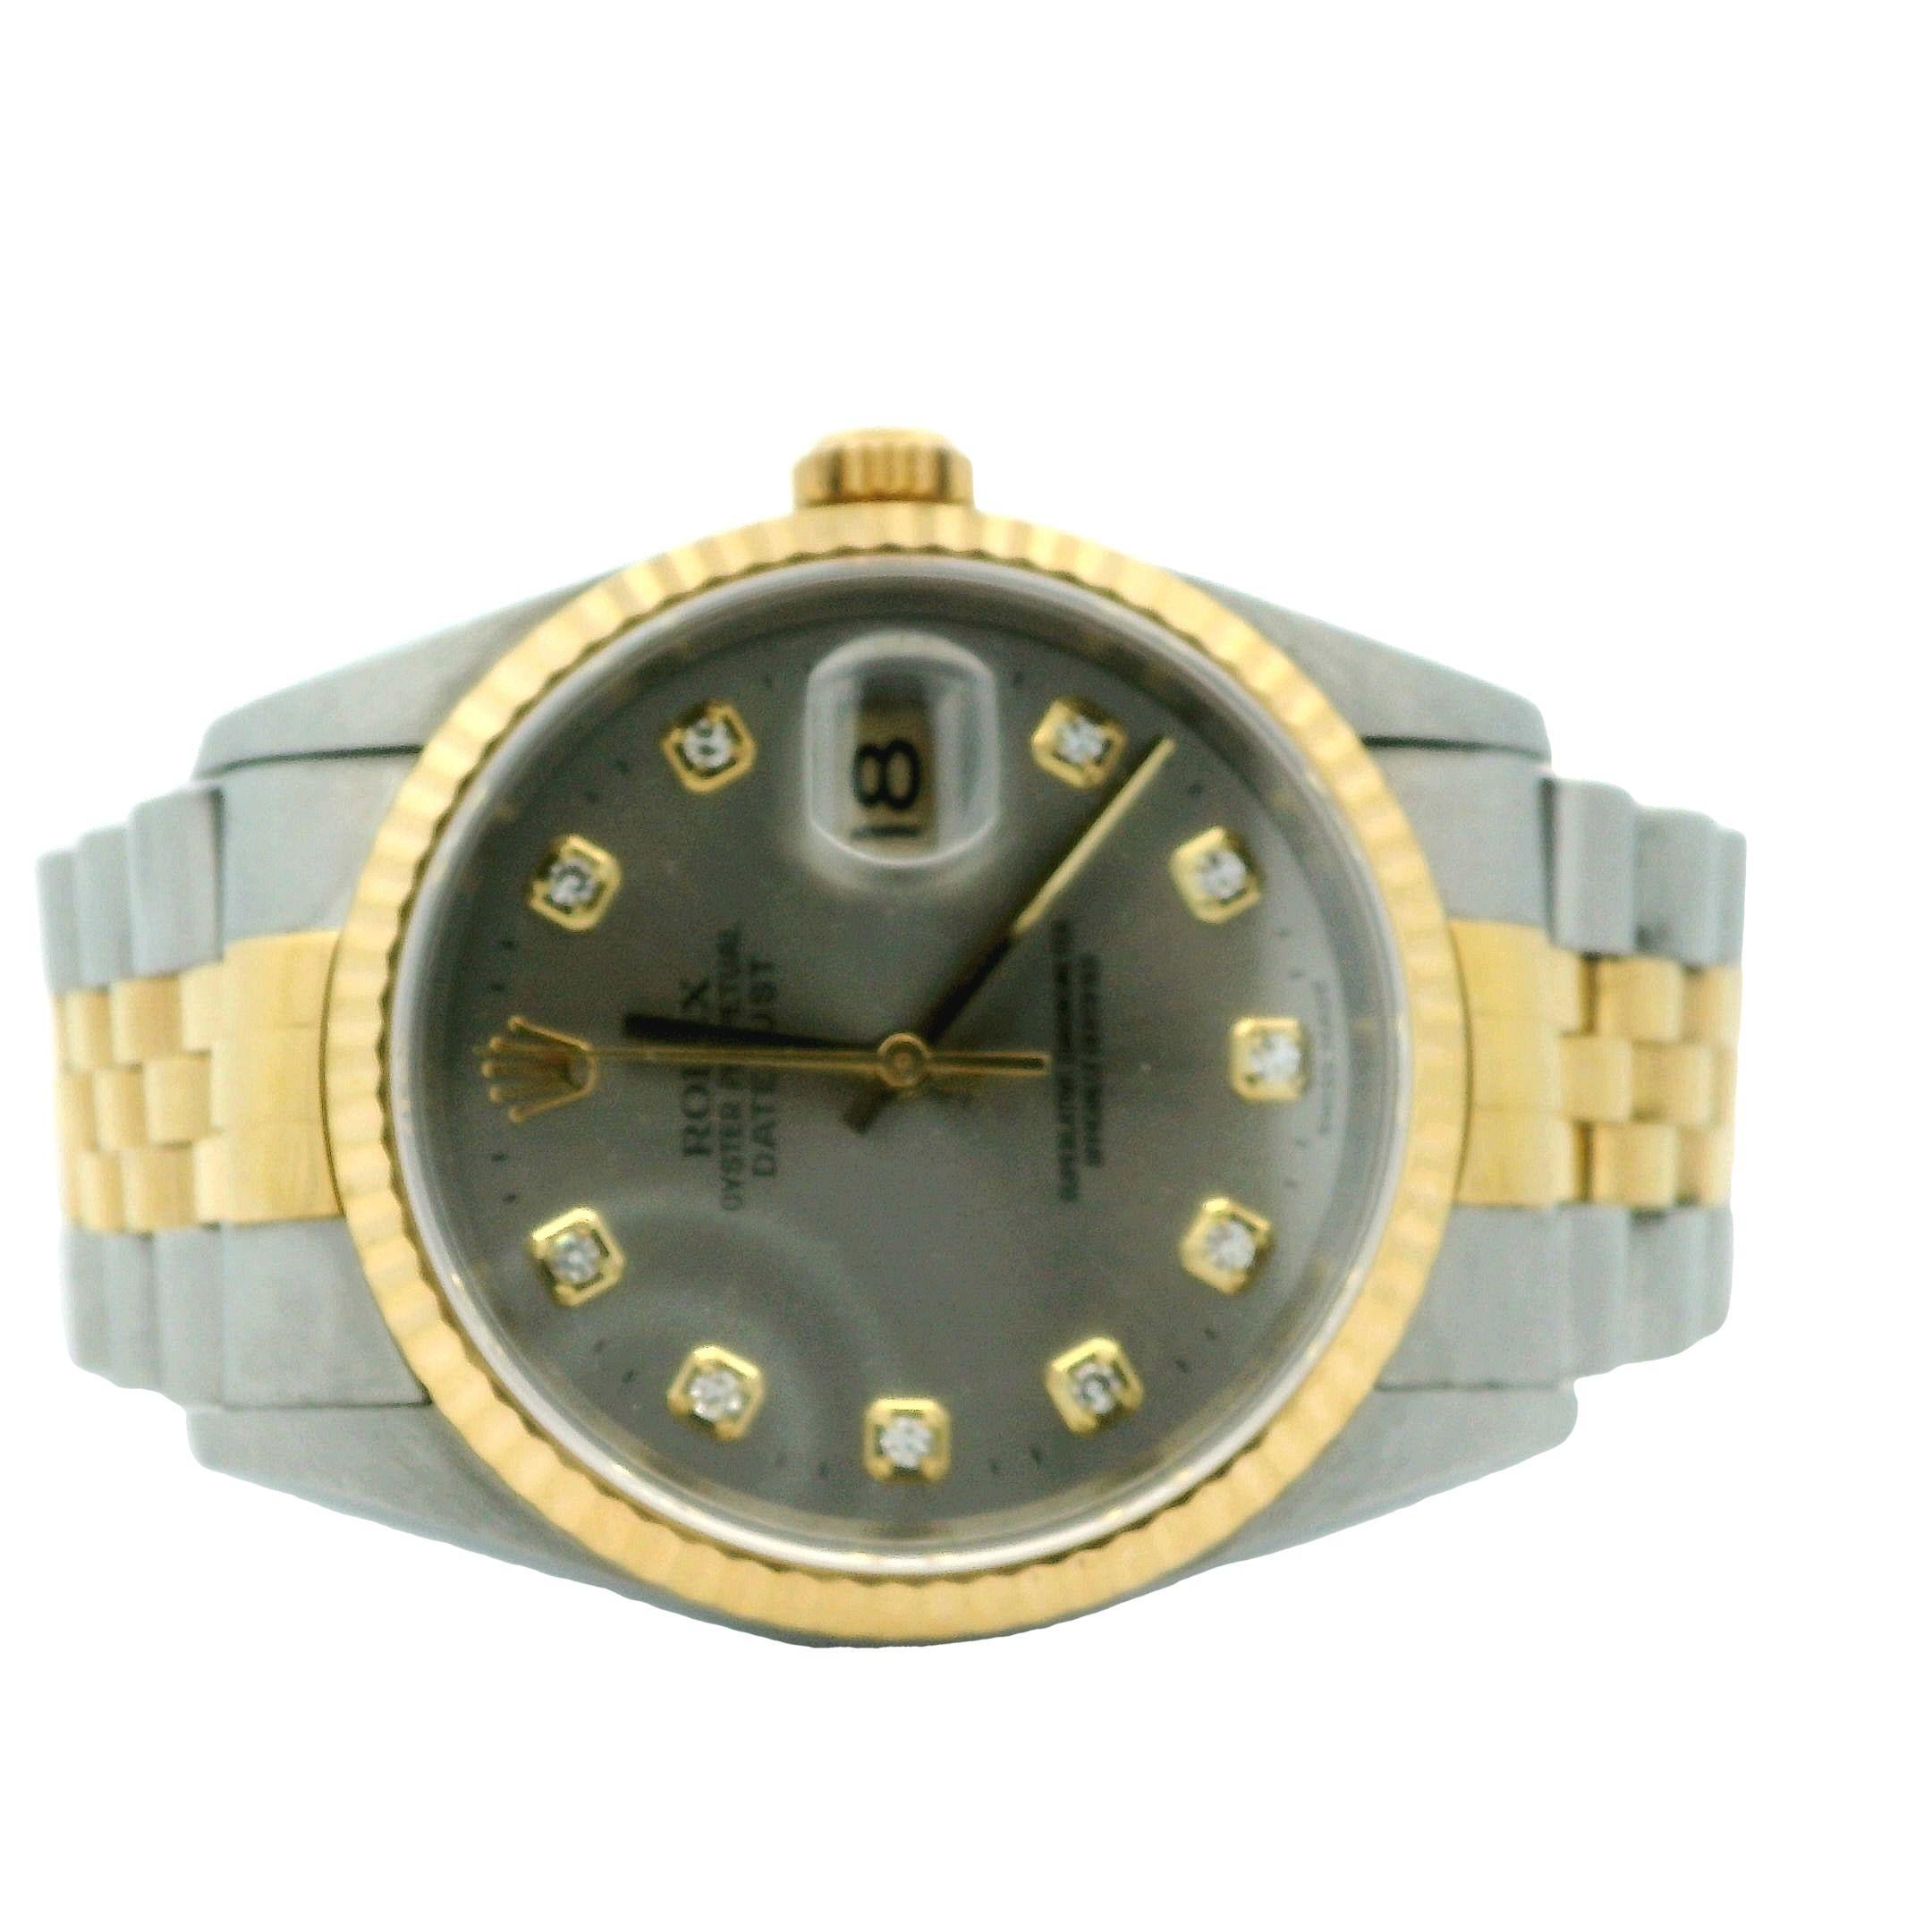 Fine pre-owned mint condition all factory 36mm Rolex Datejust quickset 18 karat and stainless steel fluted yellow gold bezel, jubilee bracelet and rare silver color diamond dial. Officially certified chronometer automatic self-winding movement, and